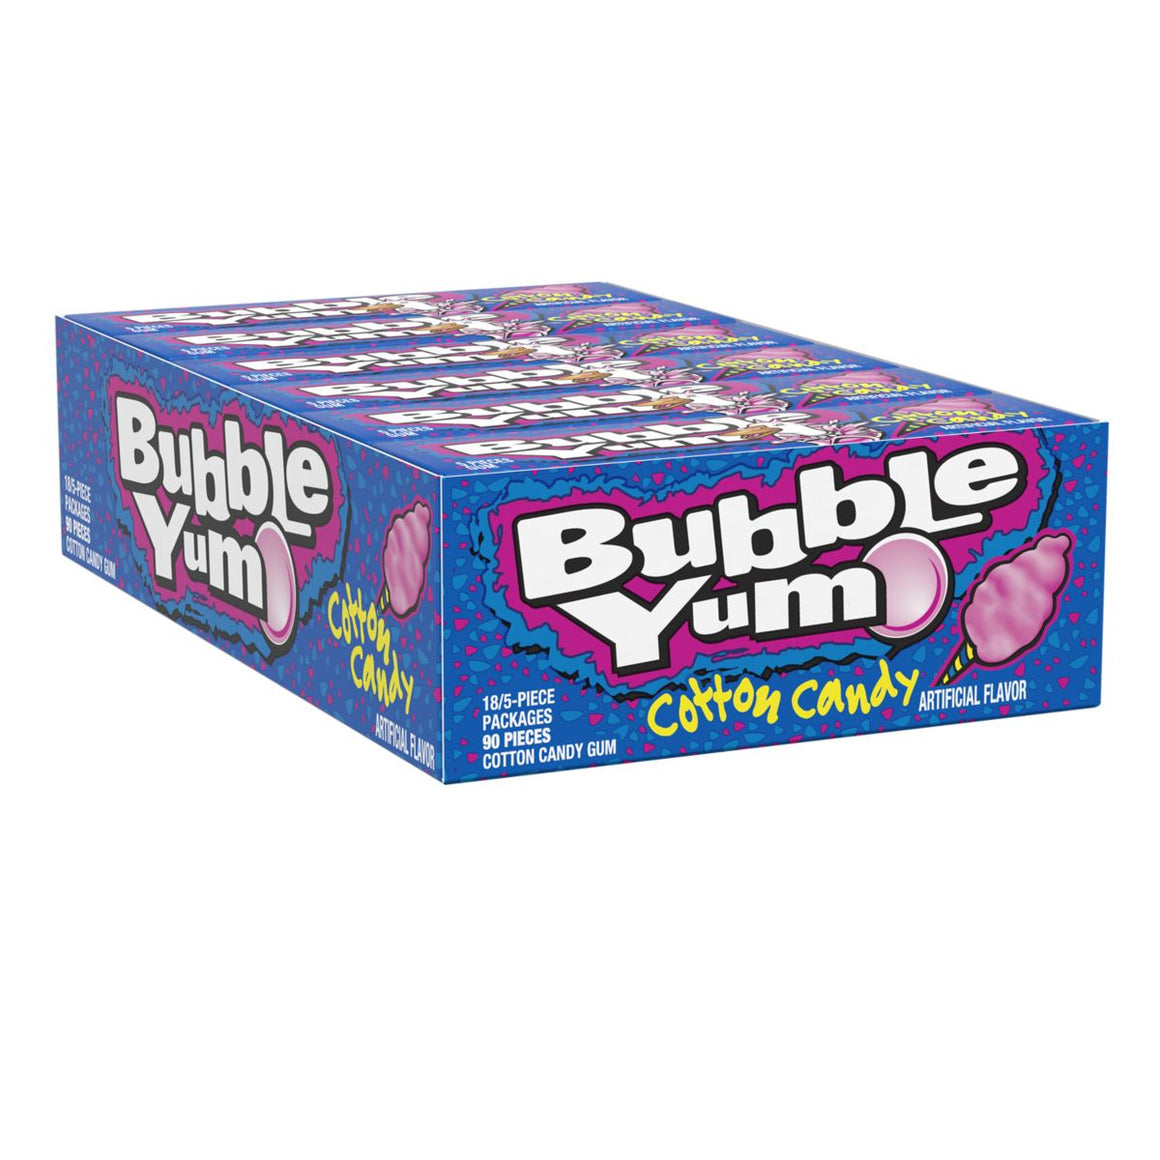 All City Candy Bubble Yum Cotton Candy Bubble Gum - 5-Piece Pack Gum/Bubble Gum Hershey's 1 Pack For fresh candy and great service, visit www.allcitycandy.com